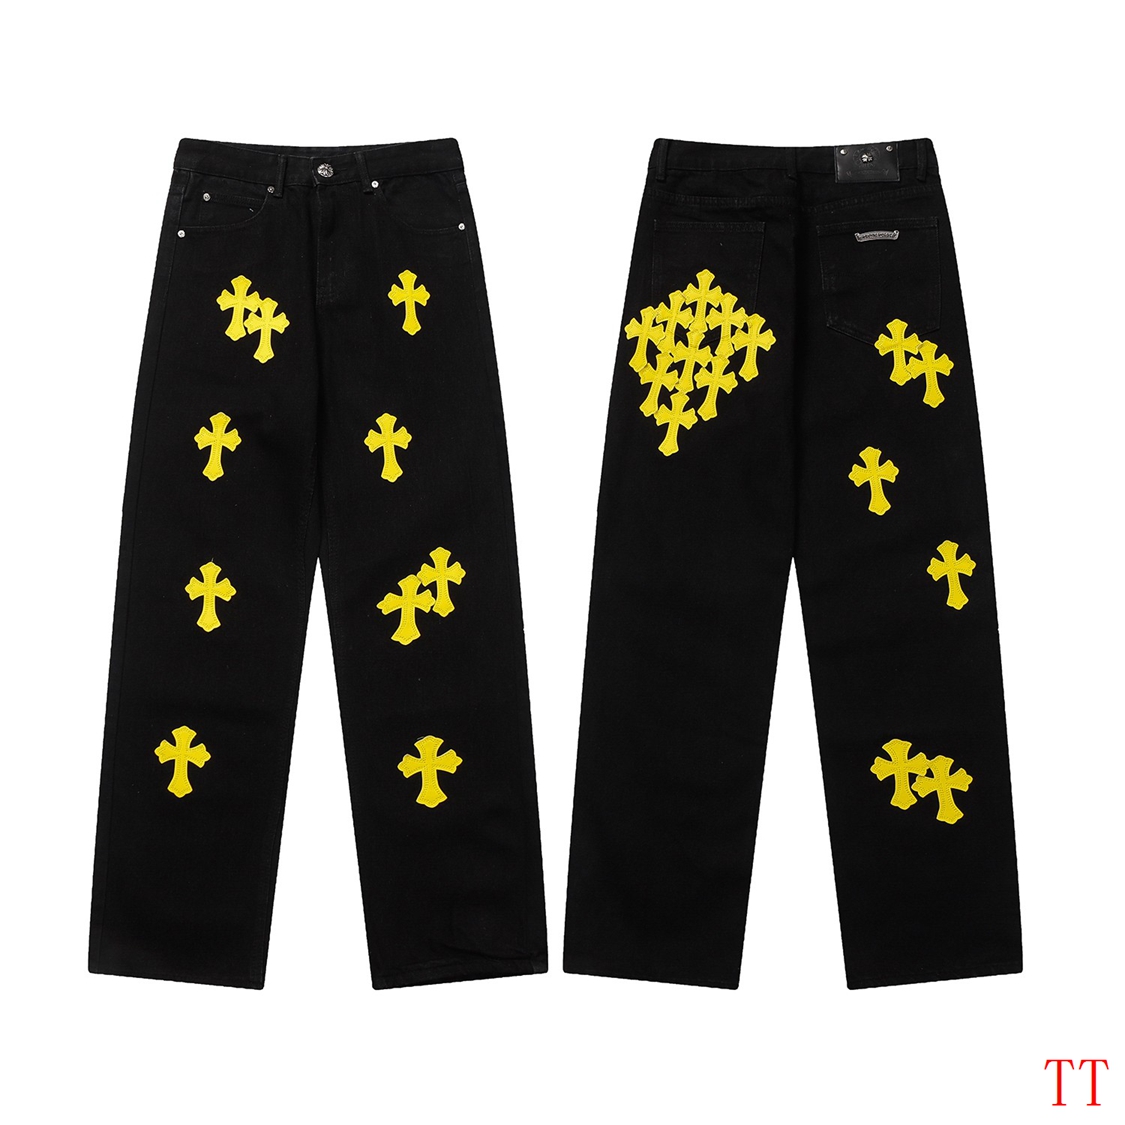 Chrome Hearts Straight Cut Jeans For Men # 270977, cheap Chrome Hearts Jeans, only $49!